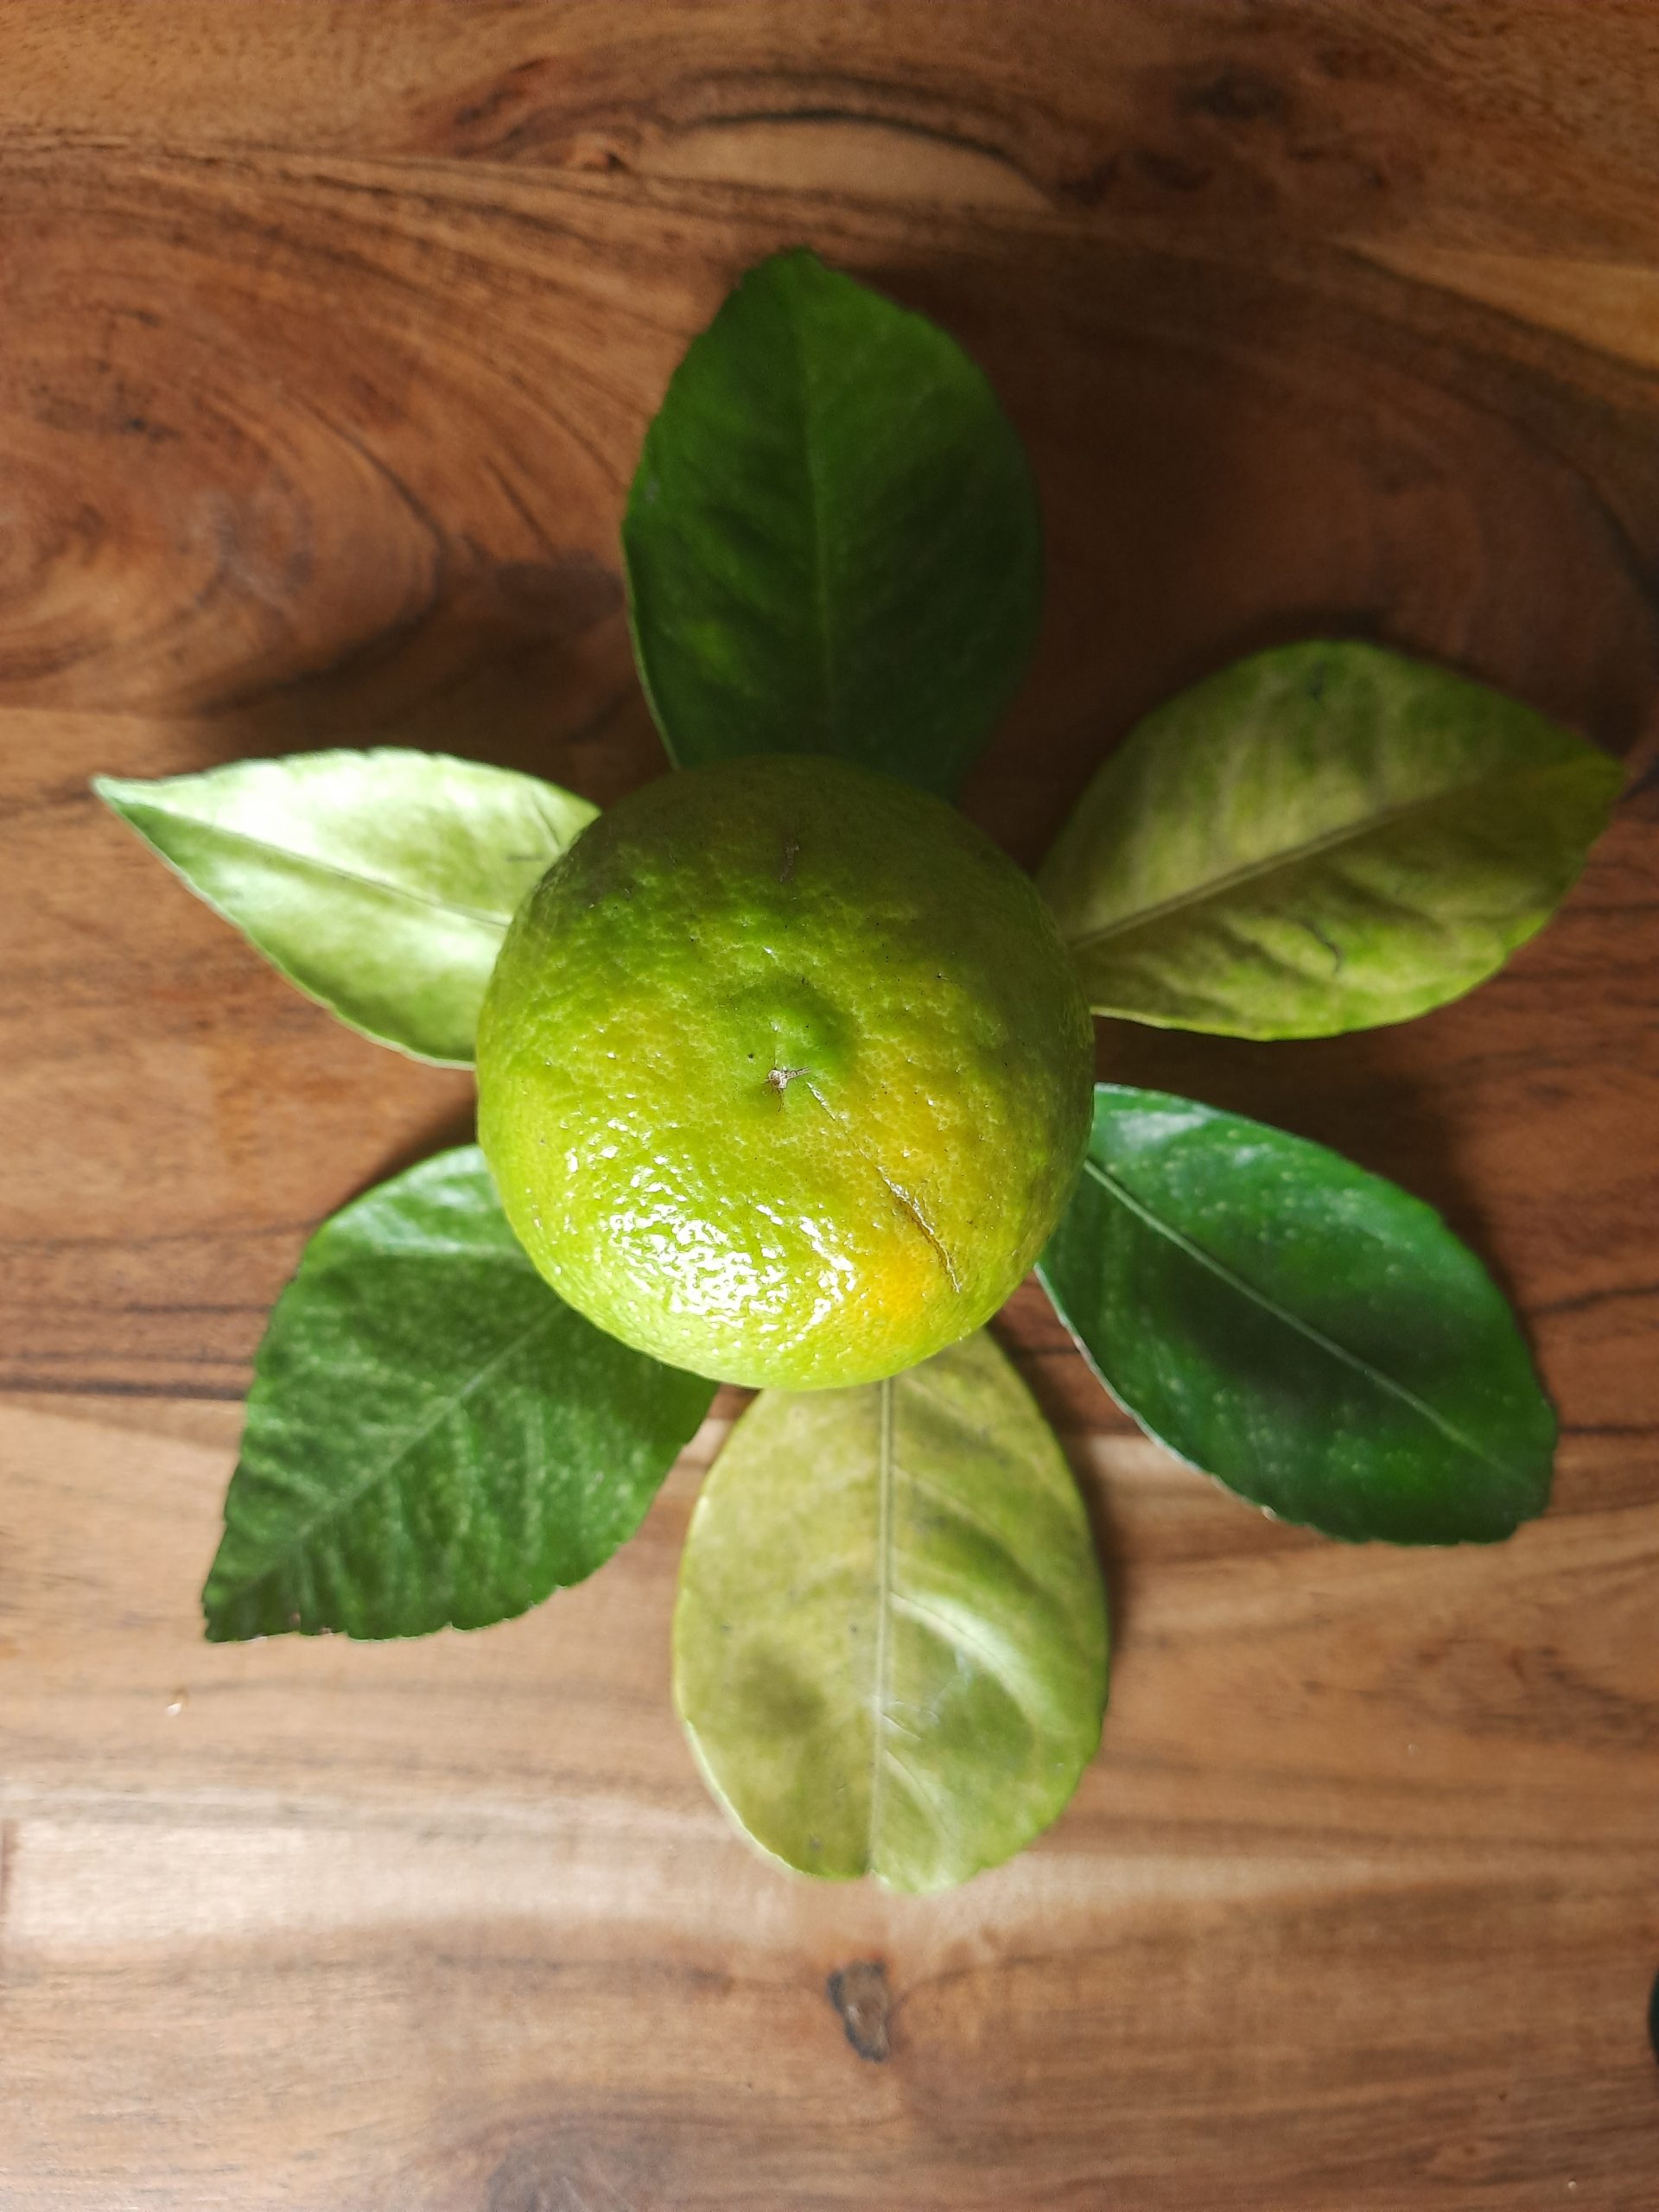 An orange and leaves